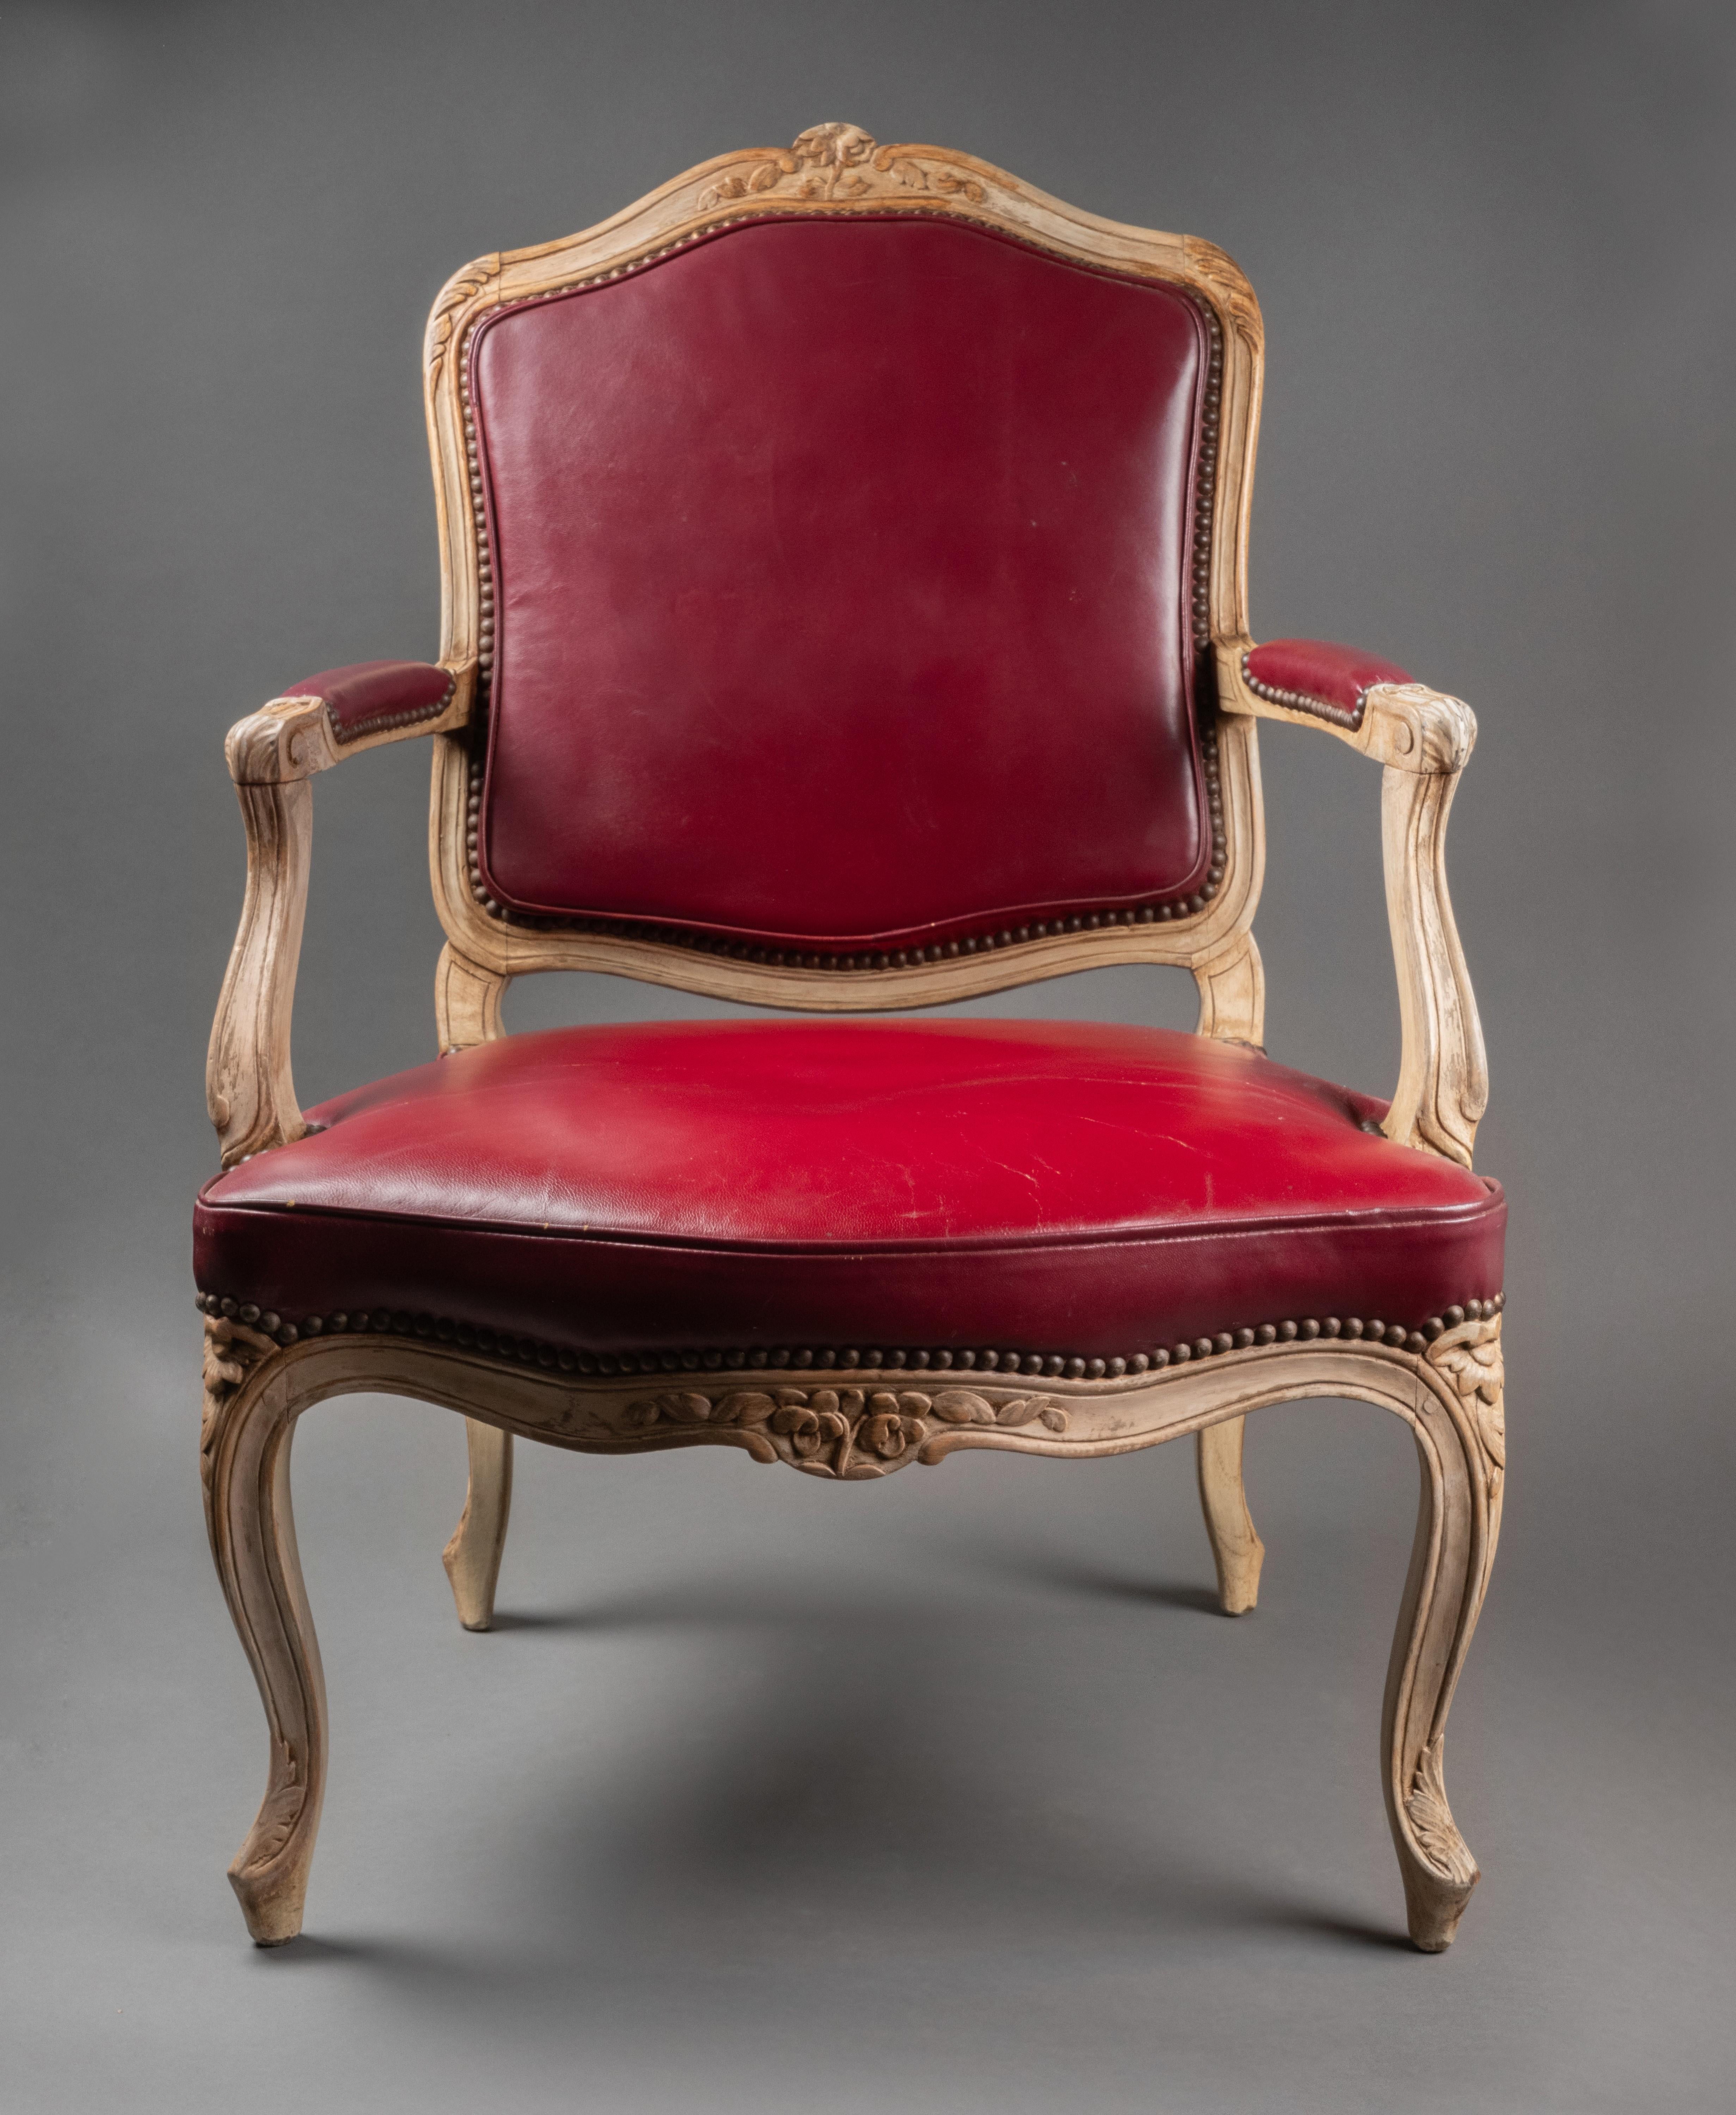 A suite of four Louis XV lacquered woord armchairs  circa 1750
Ornated with flowers and leaves, with a red leather upholstery.
18th century, Paris, France
Size: height 36.61 inches, width: 25.59 inches, depth: 20.47 inches (93x65x52 cm)